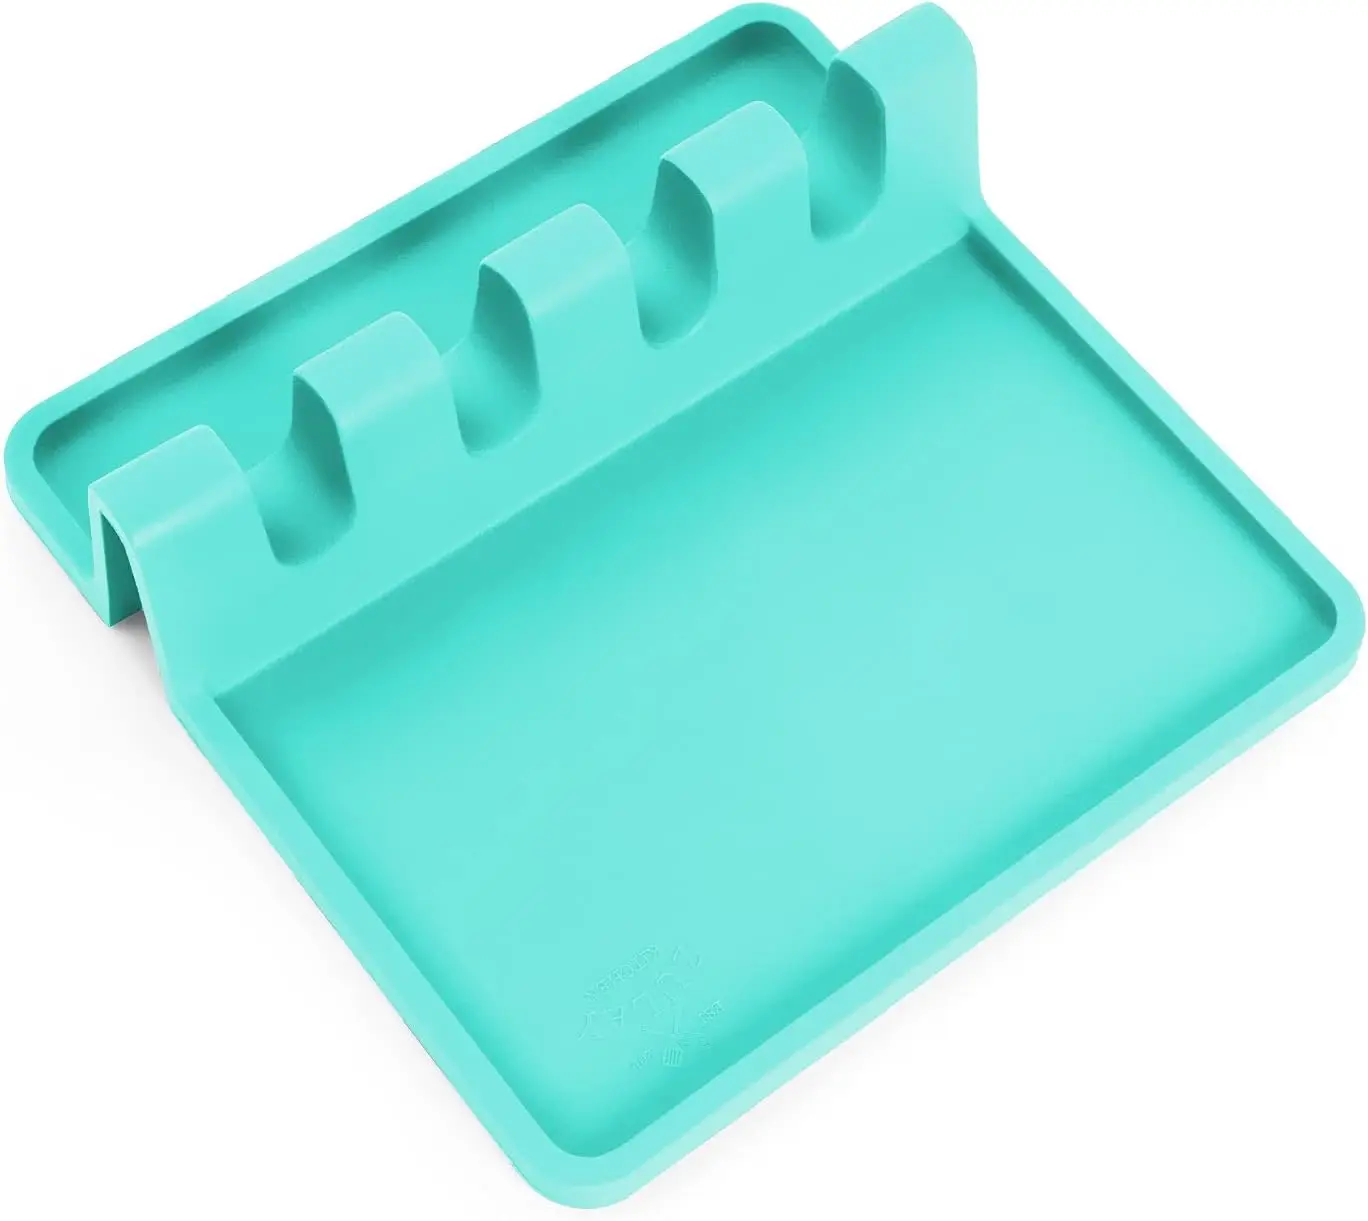 

Silicone Utensil Rest with Drip Pad for Multiple Utensils, Heat-Resistant, Kitchen Utensil Holder for Spoons, Tongs ＆ more